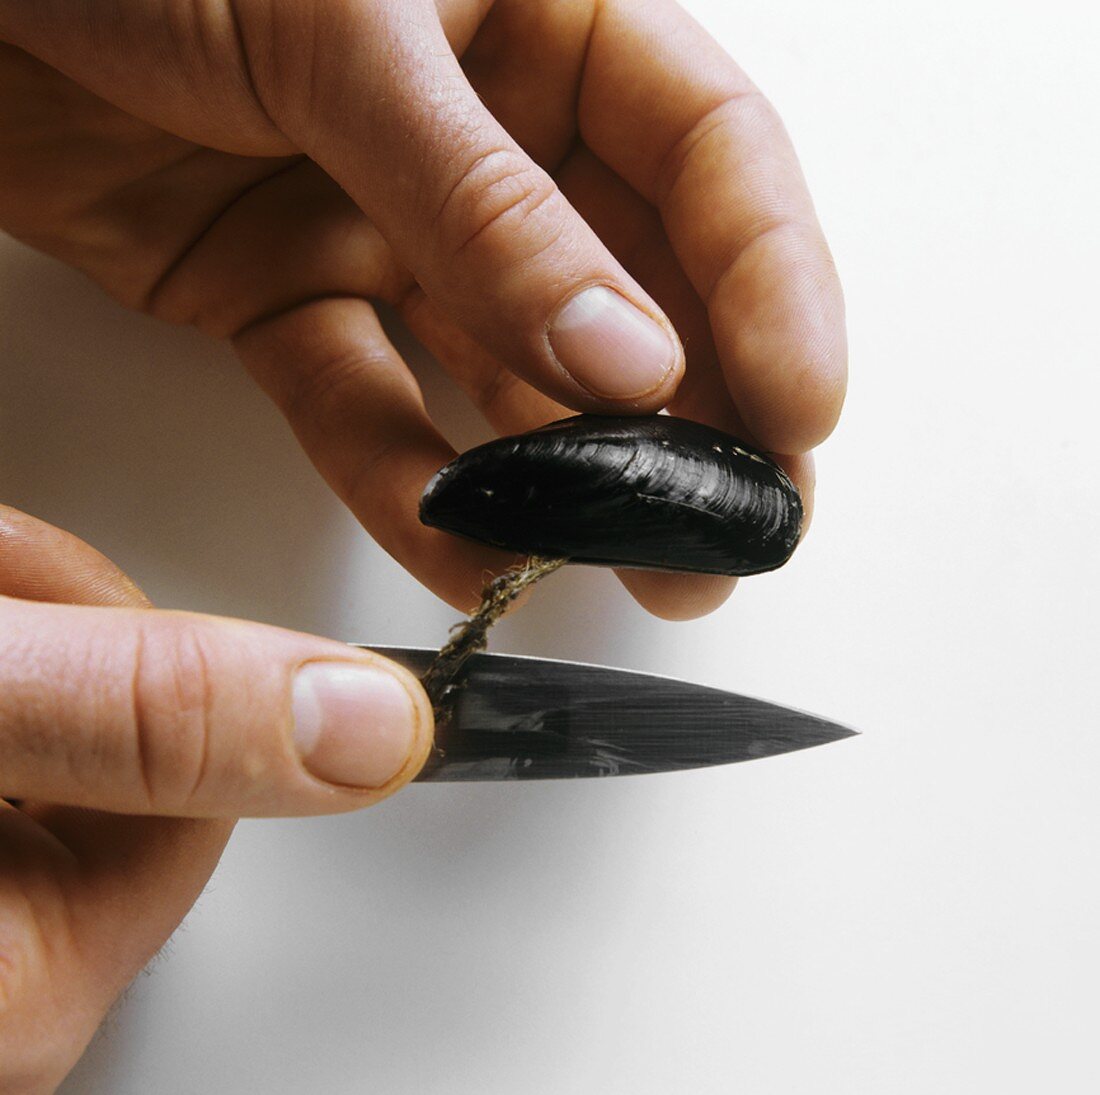 Removing the beard from a mussel